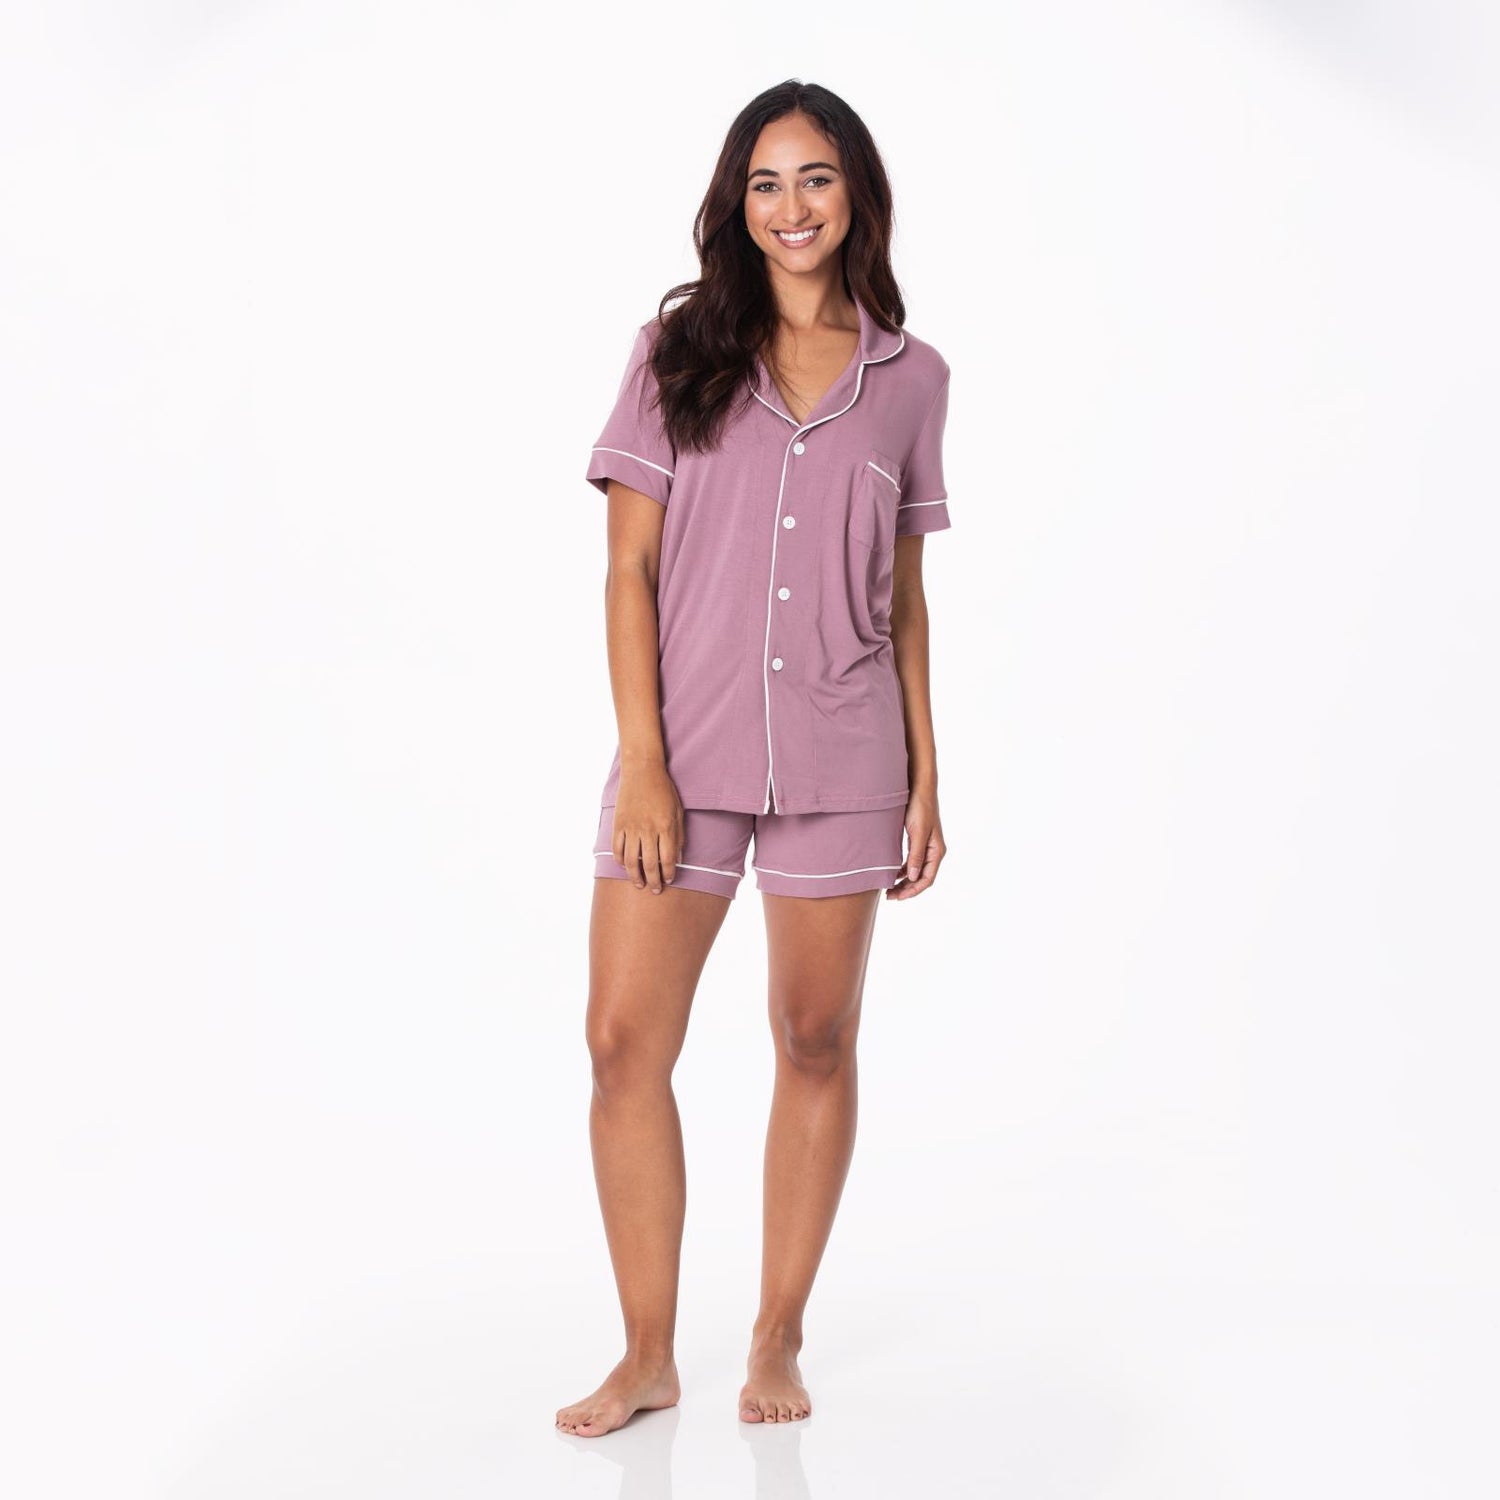 Women's Short Sleeve Collared Pajama Set with Shorts in Elderberry with Natural